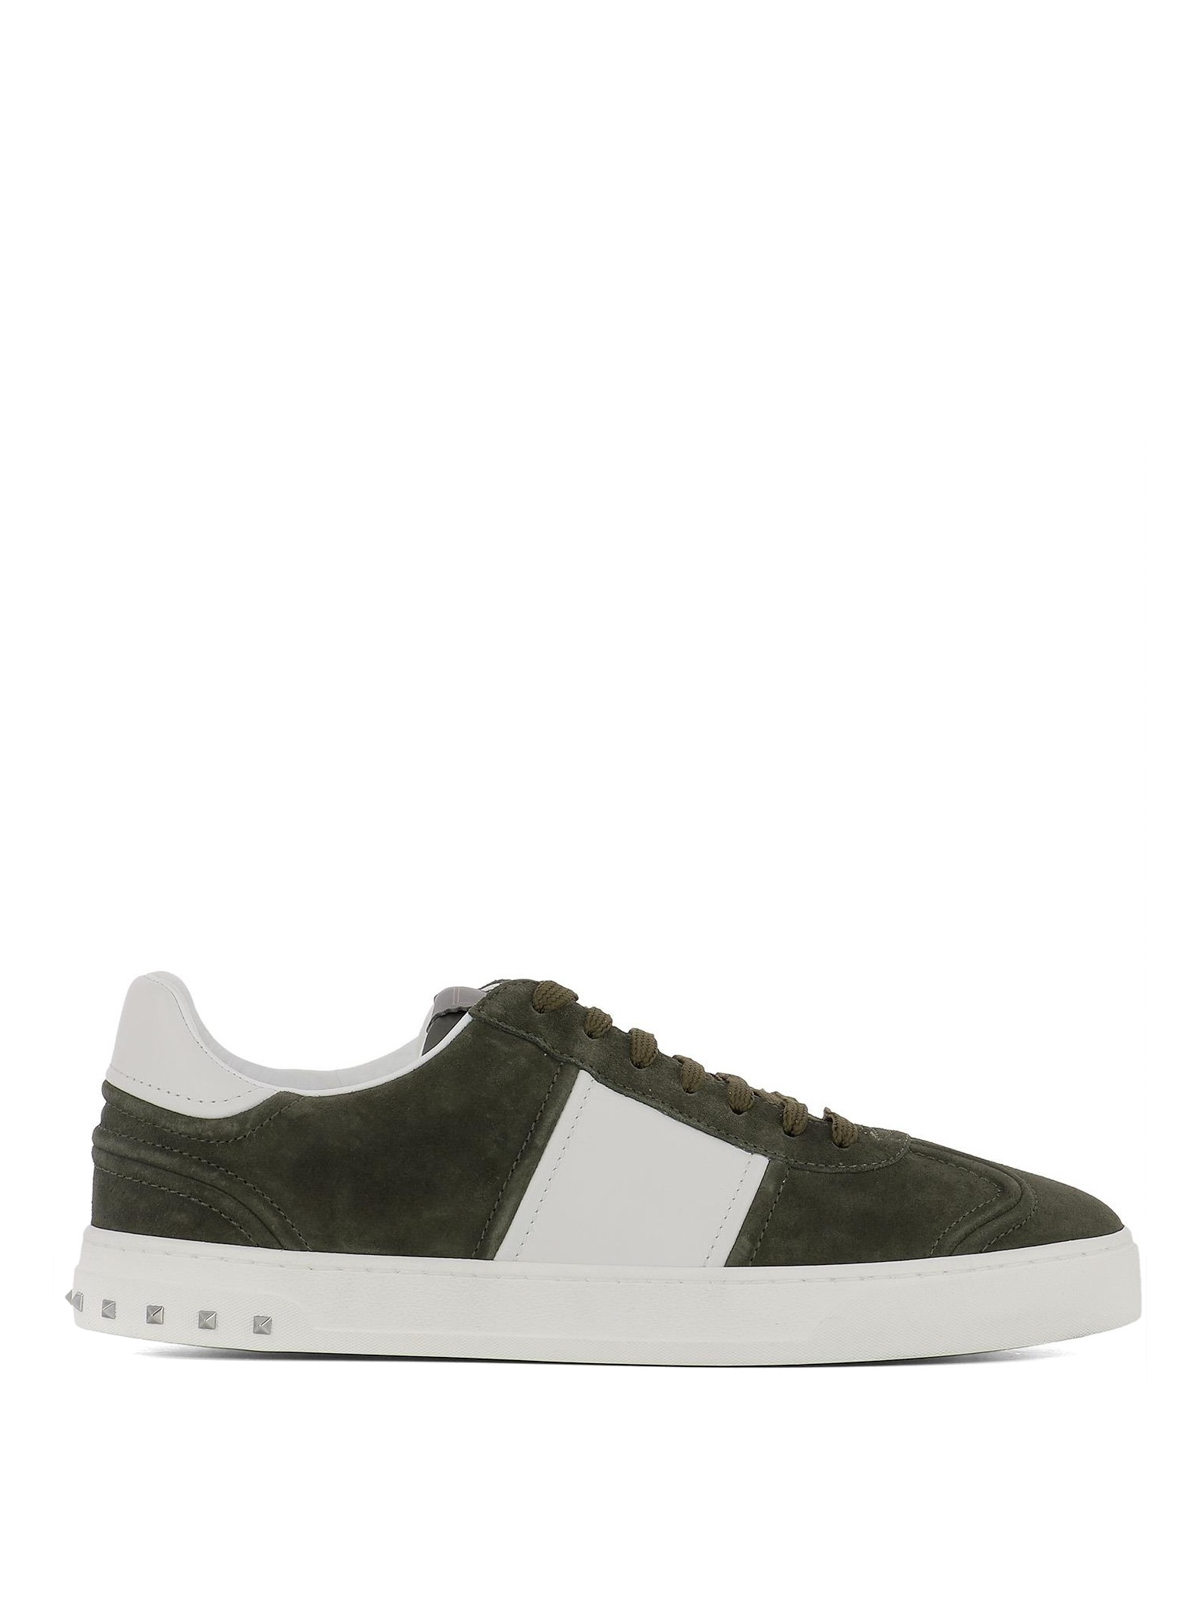 Trainers Valentino Garavani - Flycrew green suede sneakers - QY2S0A08LAR0GZ